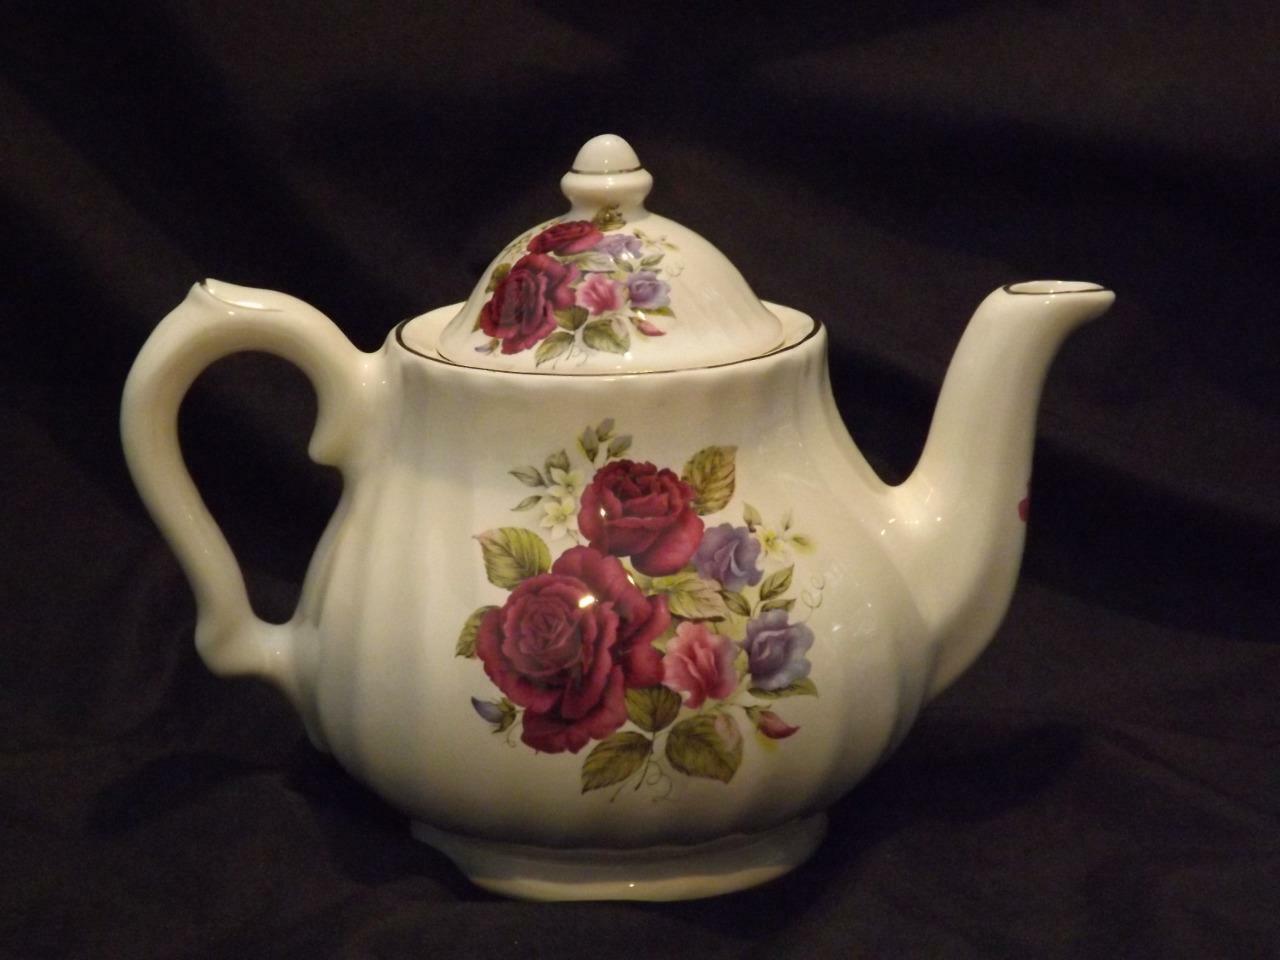 Royal Ranking TOP10 Celadone Ceracraft England Animer and price revision Rose Teapot